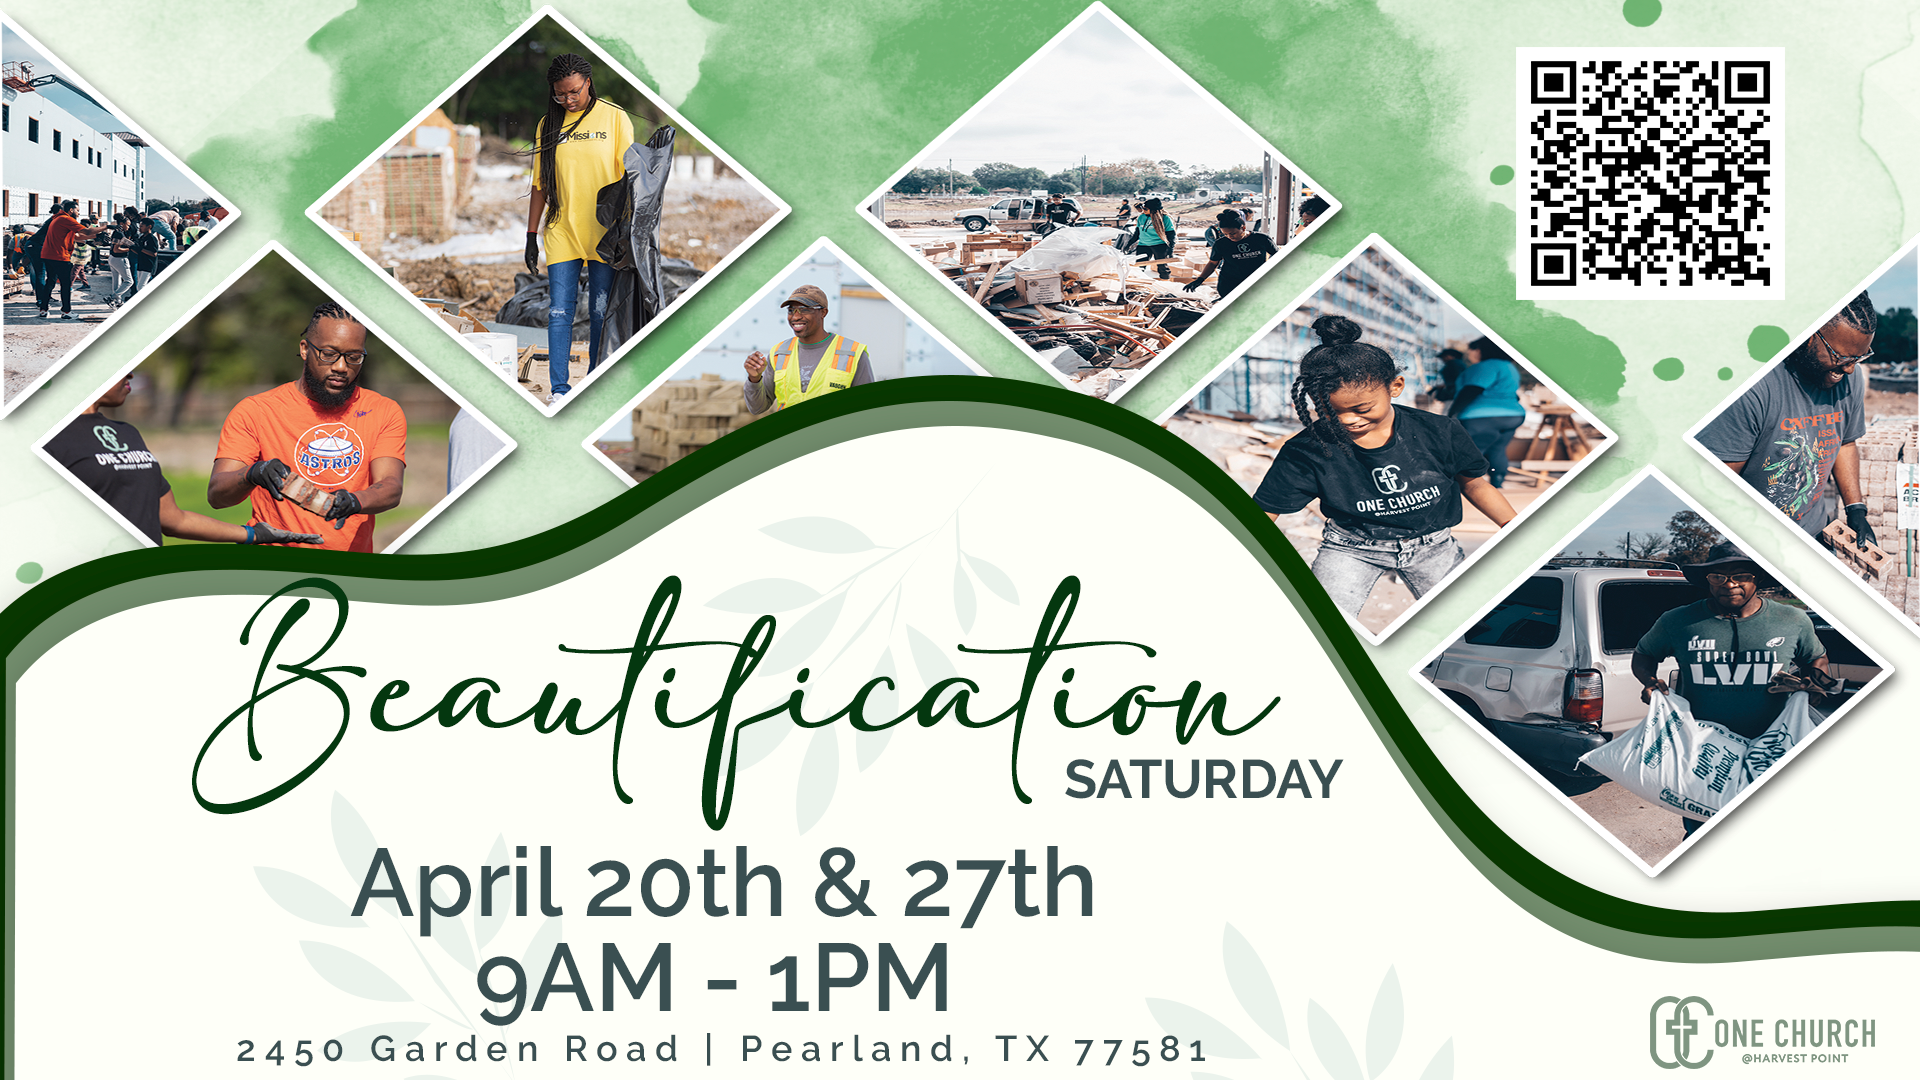 Church-wide Beautification Project | APR 20 & 27